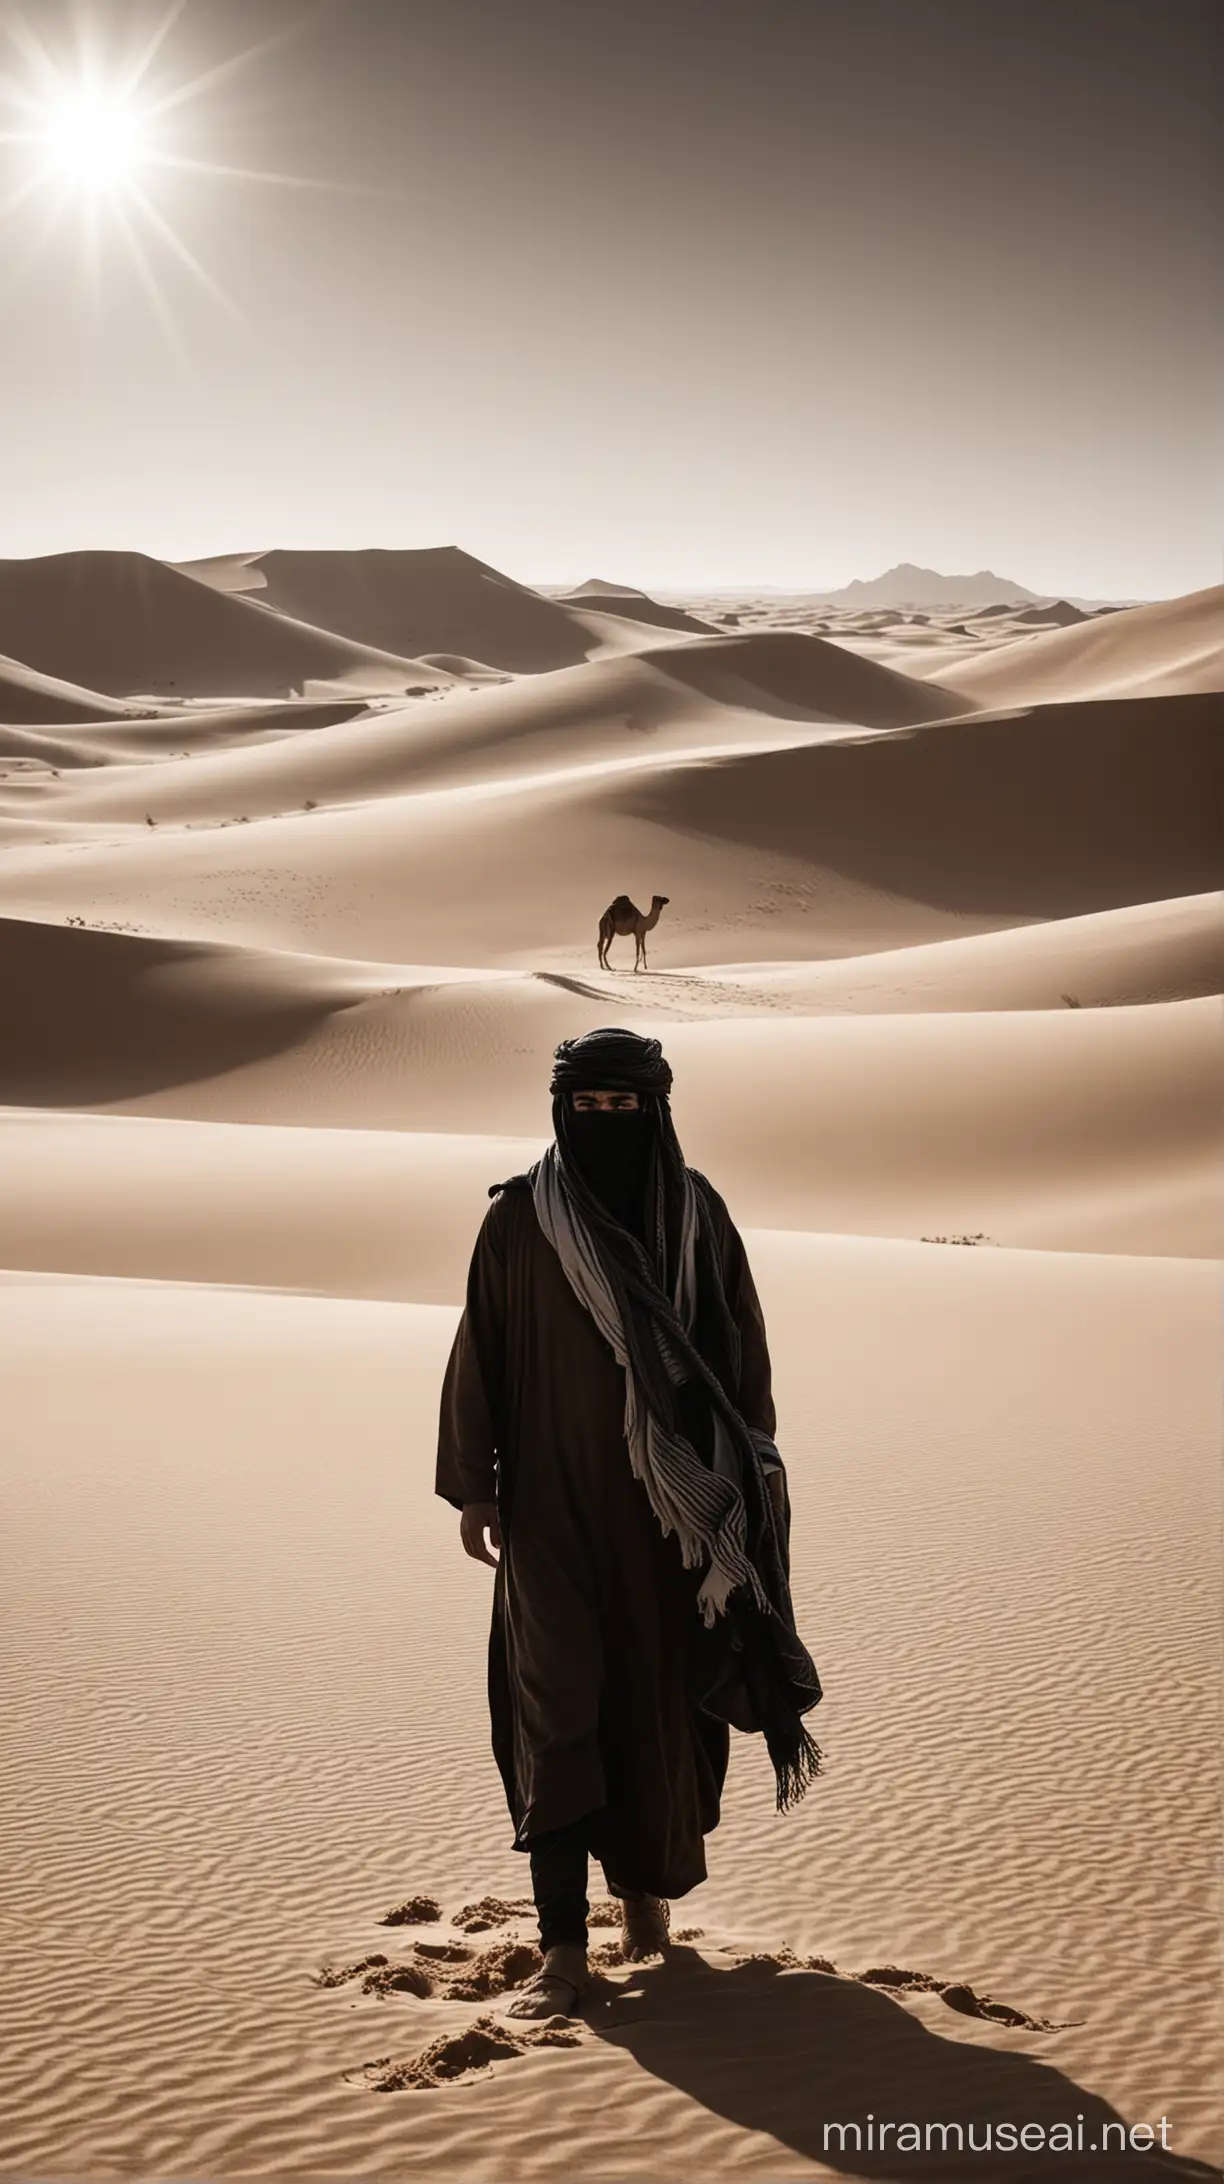 Resilient Arab Man in Traditional Attire Amidst Desert Dunes